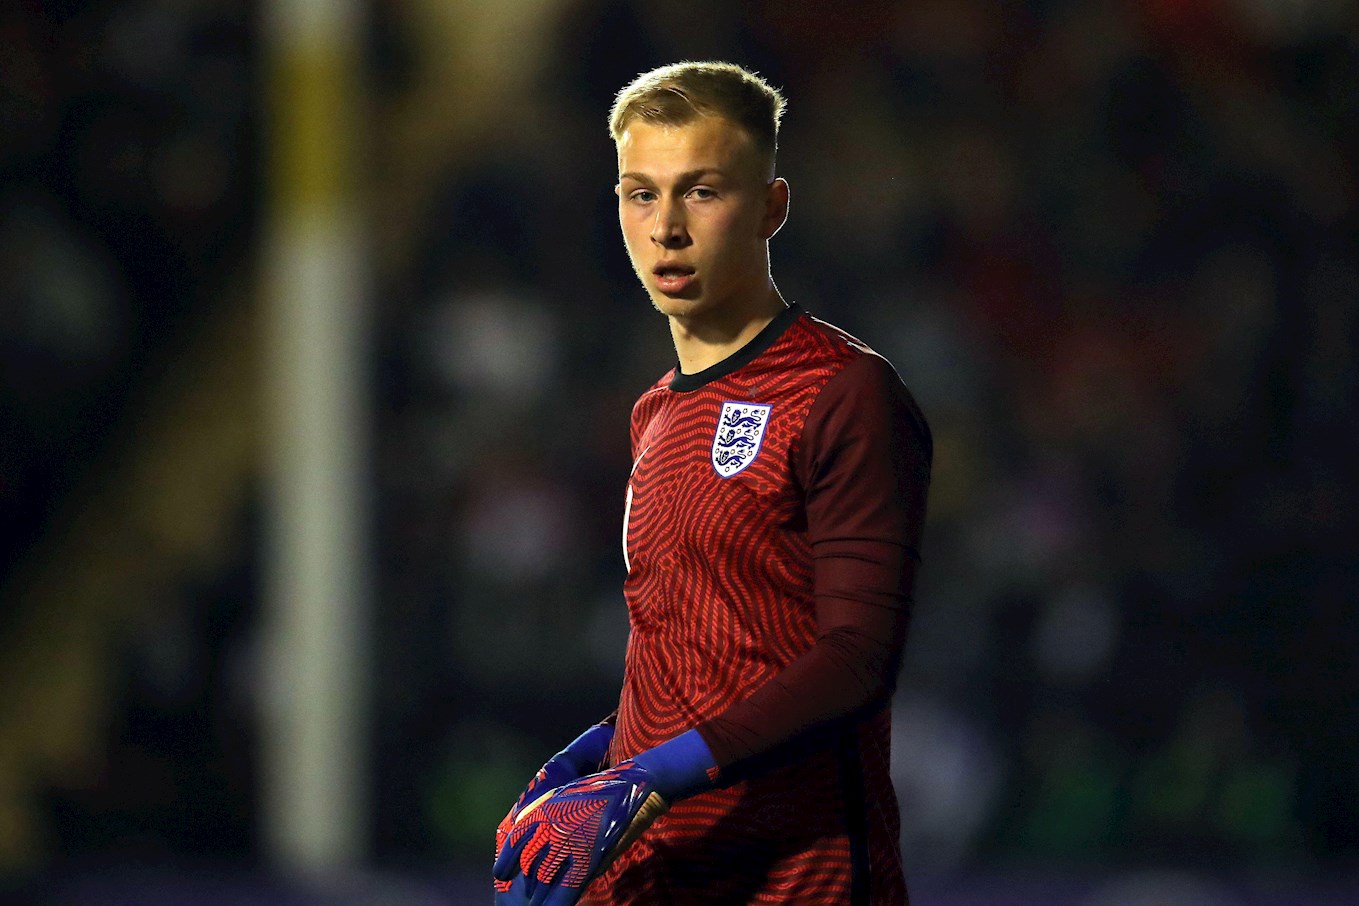 Two Bees help England Under-19 to win